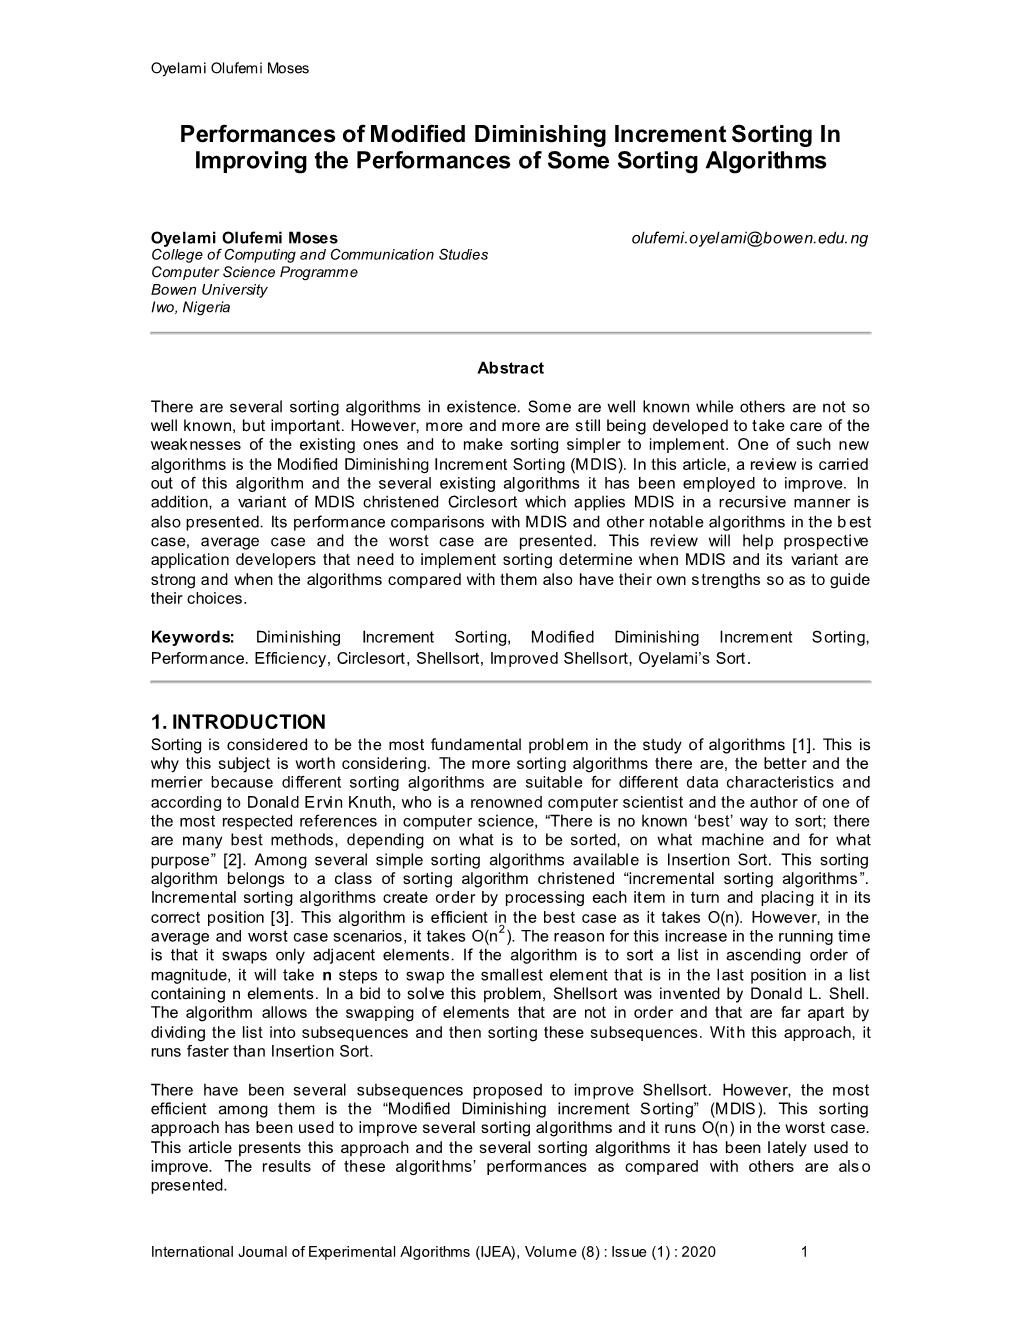 Performances of Modified Diminishing Increment Sorting in Improving the Performances of Some Sorting Algorithms